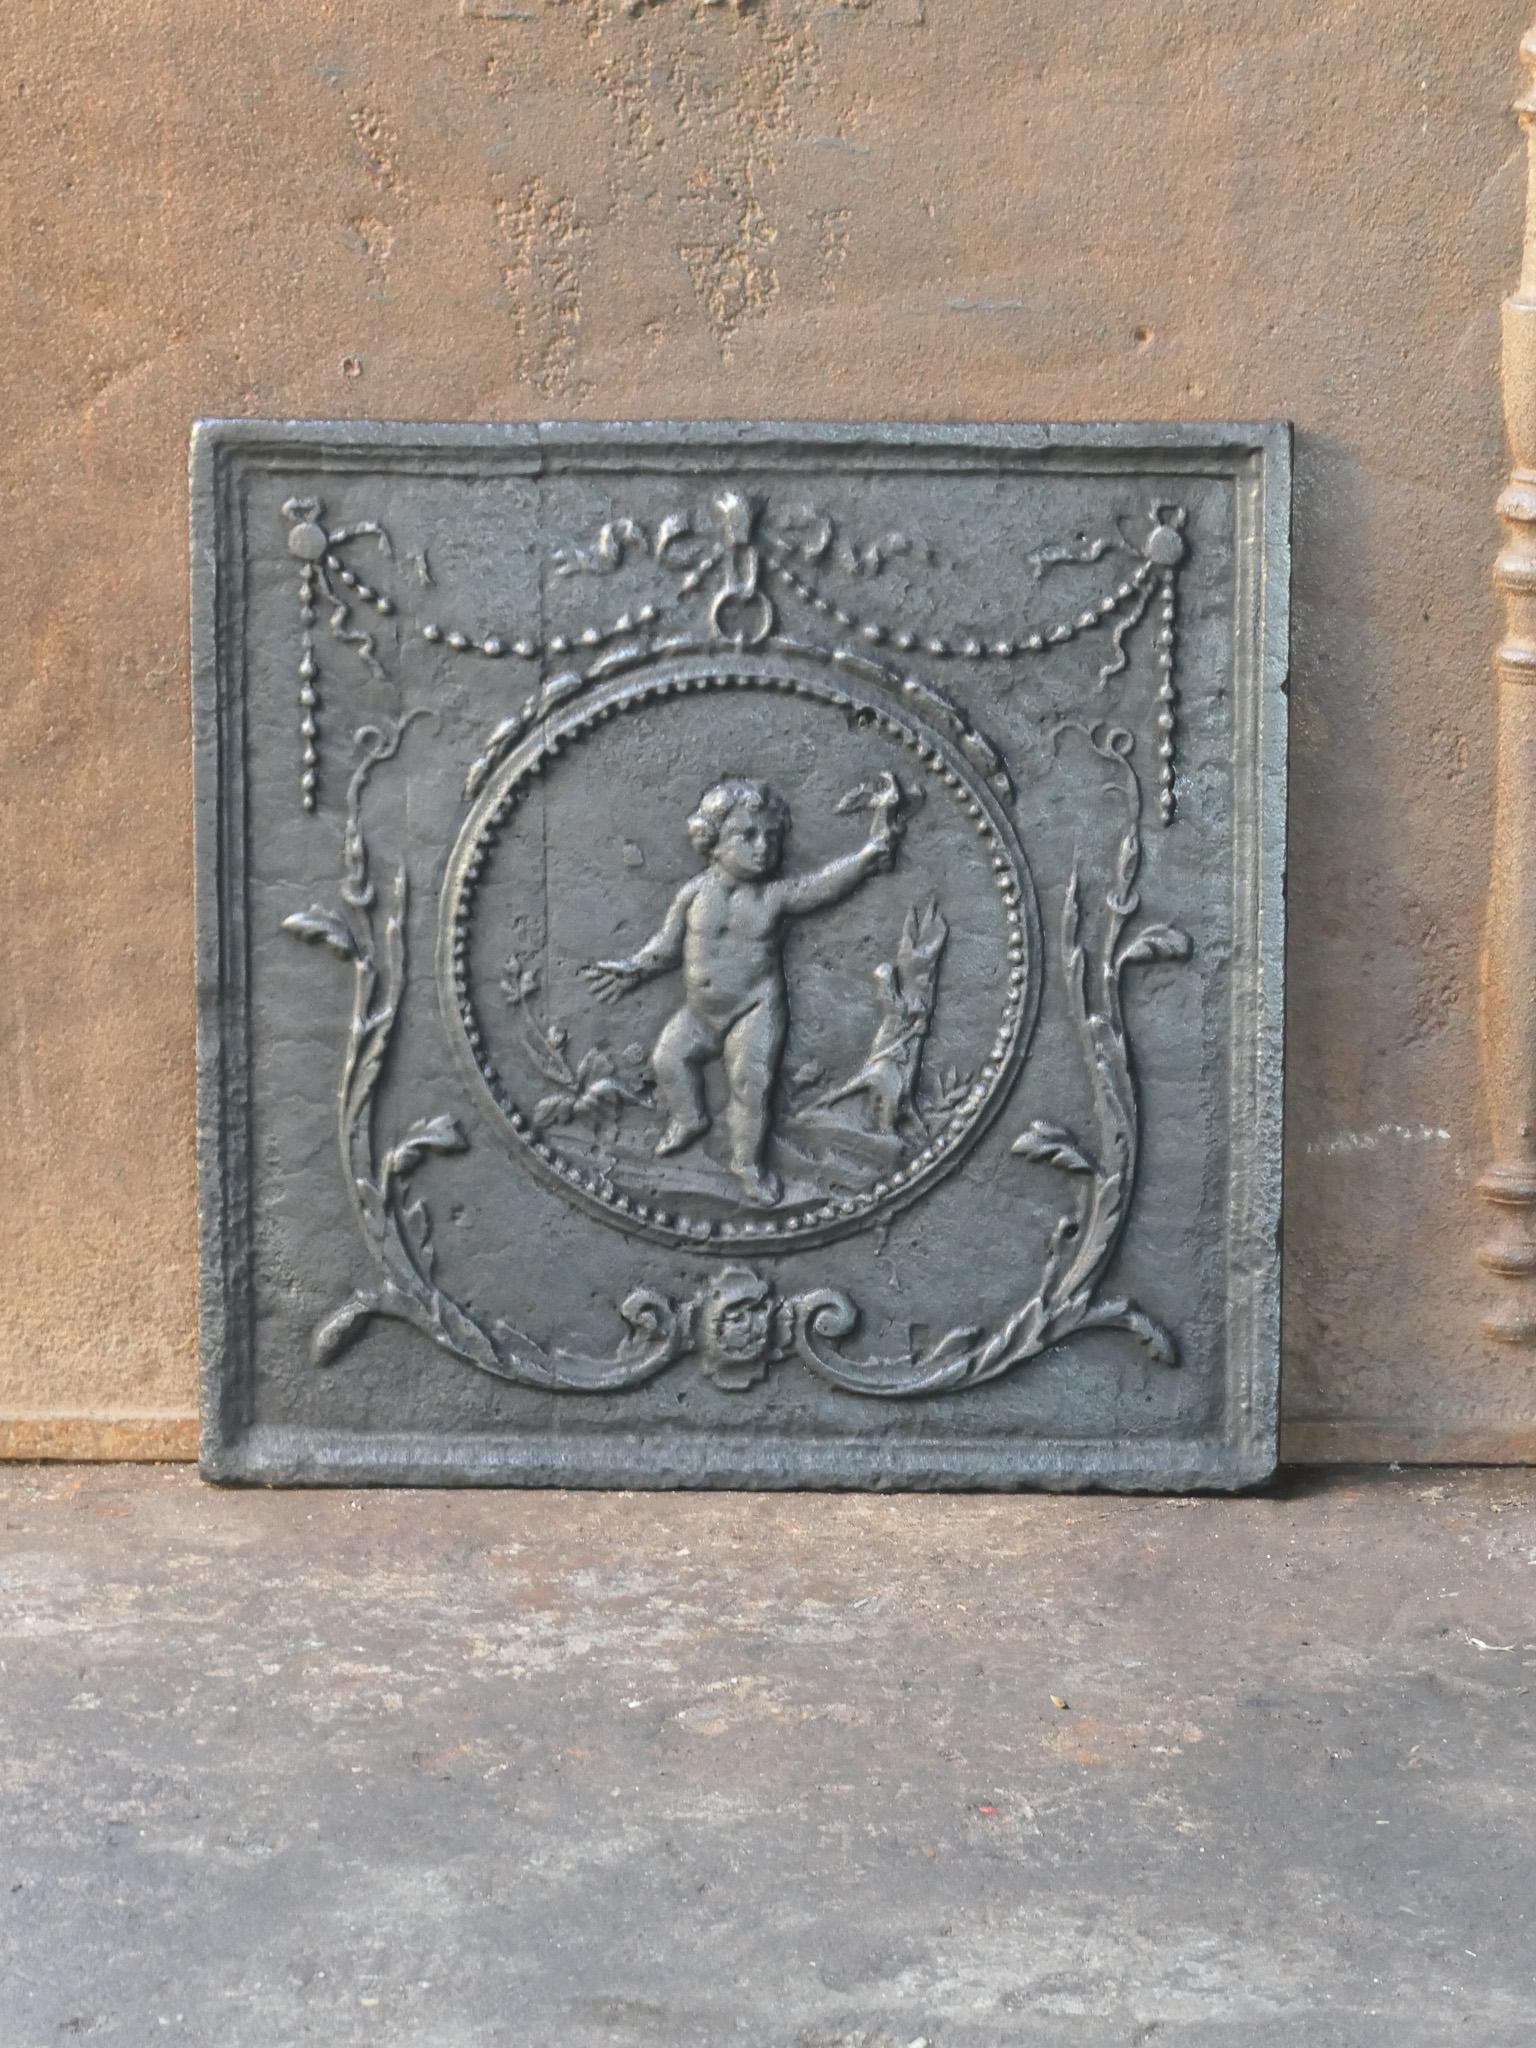 Late 18th or early 19th century French neoclassical period fireback with a cupid.

The fireback is made of cast iron and has a black / pewter patina. It is in a good condition and does not have cracks.